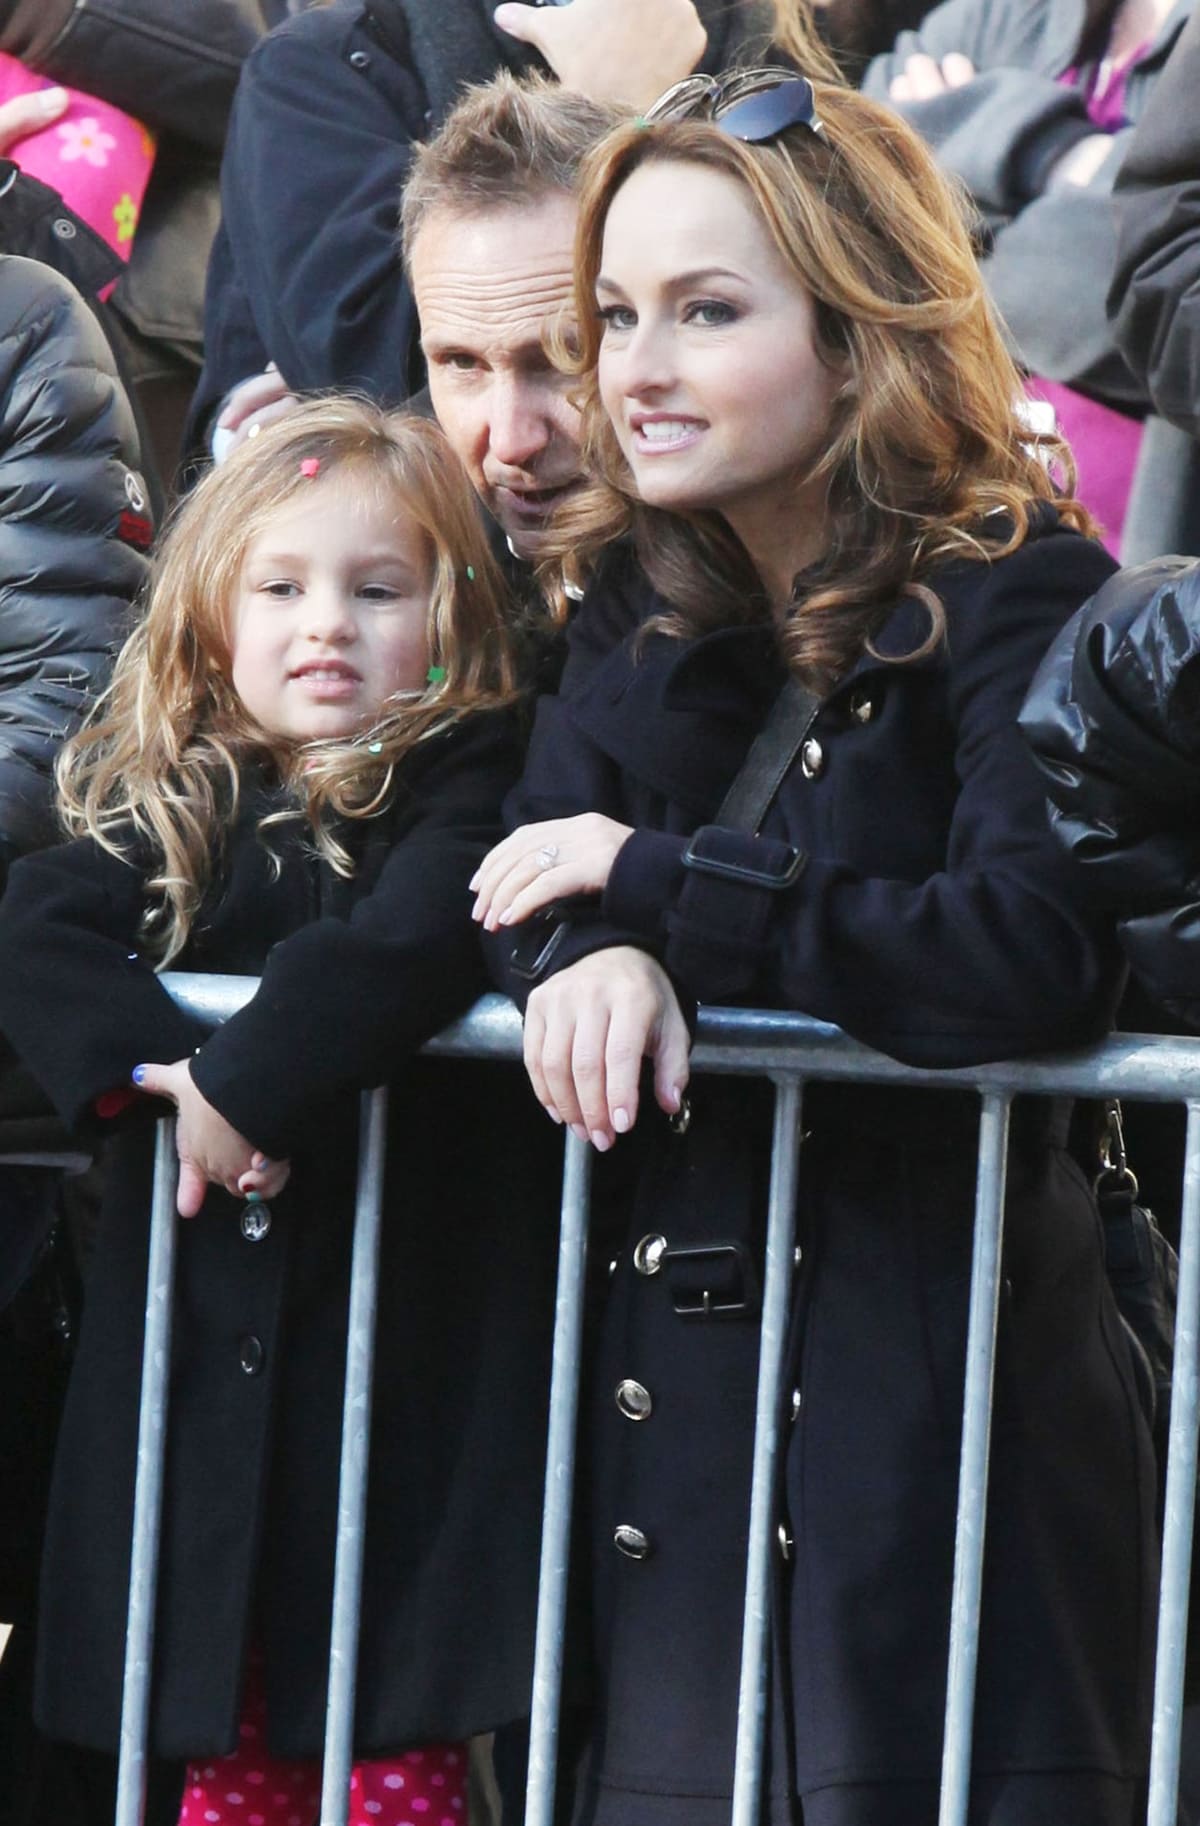 Giada De Laurentiis with her husband Todd Thompson and their daughter Jade Marie De Laurentiis Thompson watch the 86th Annual Macy's Thanksgiving Day Parade